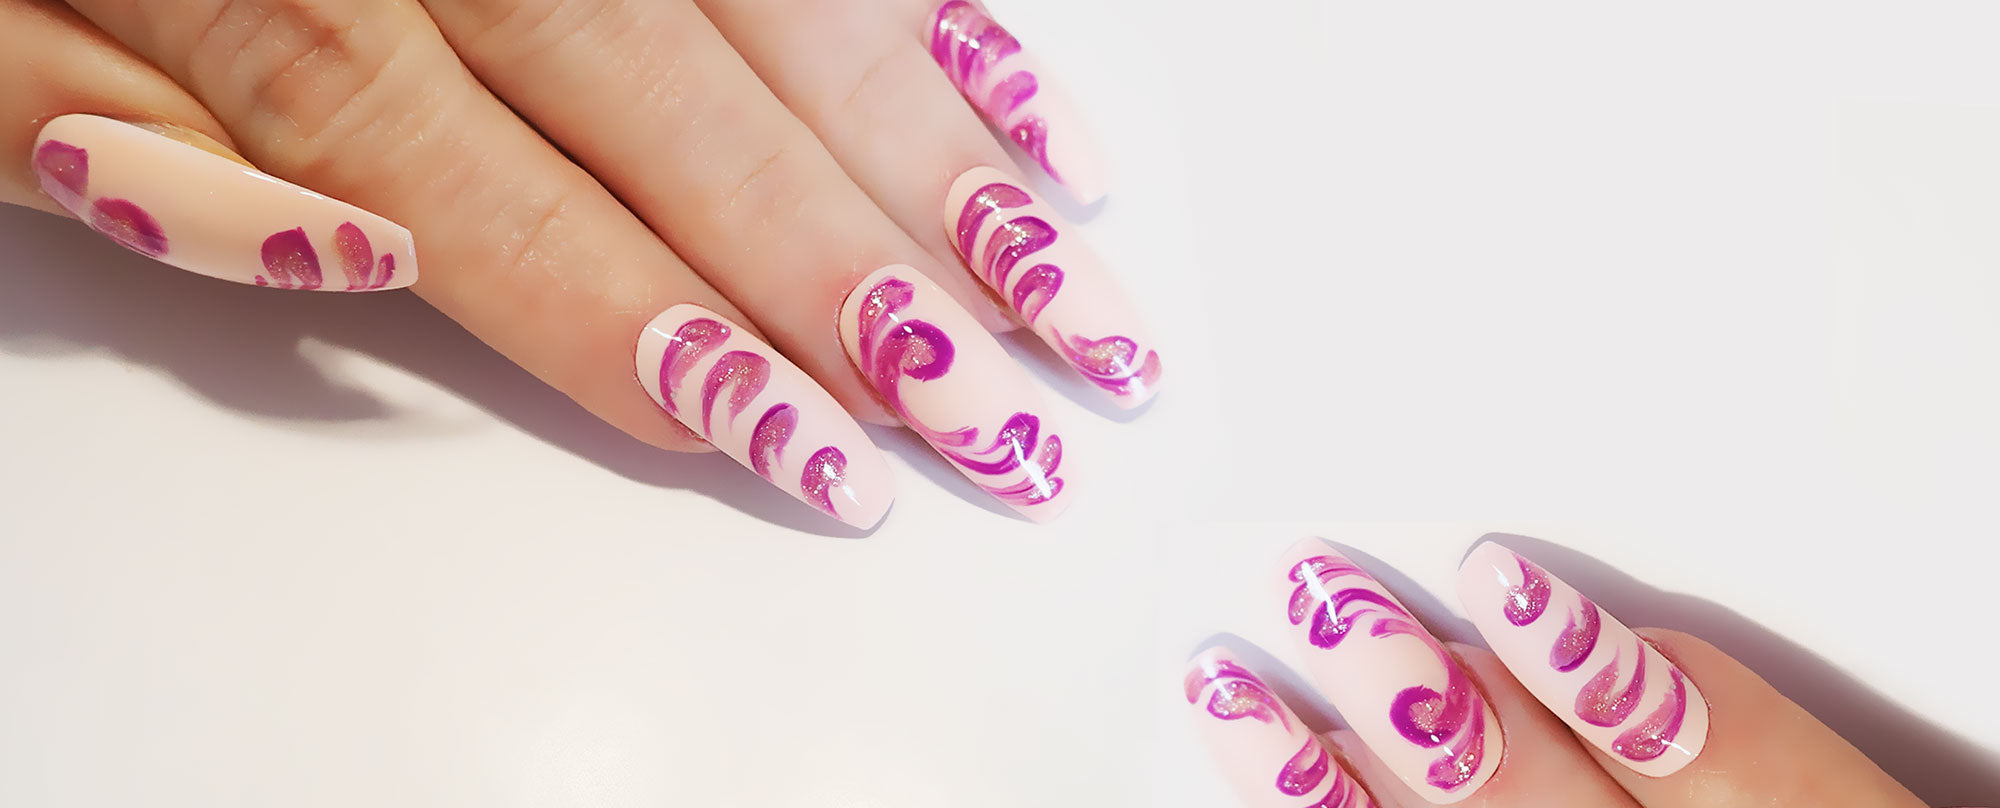 2. 10 Glass Nail Art Designs That Will Make Your Nails Shine - wide 1